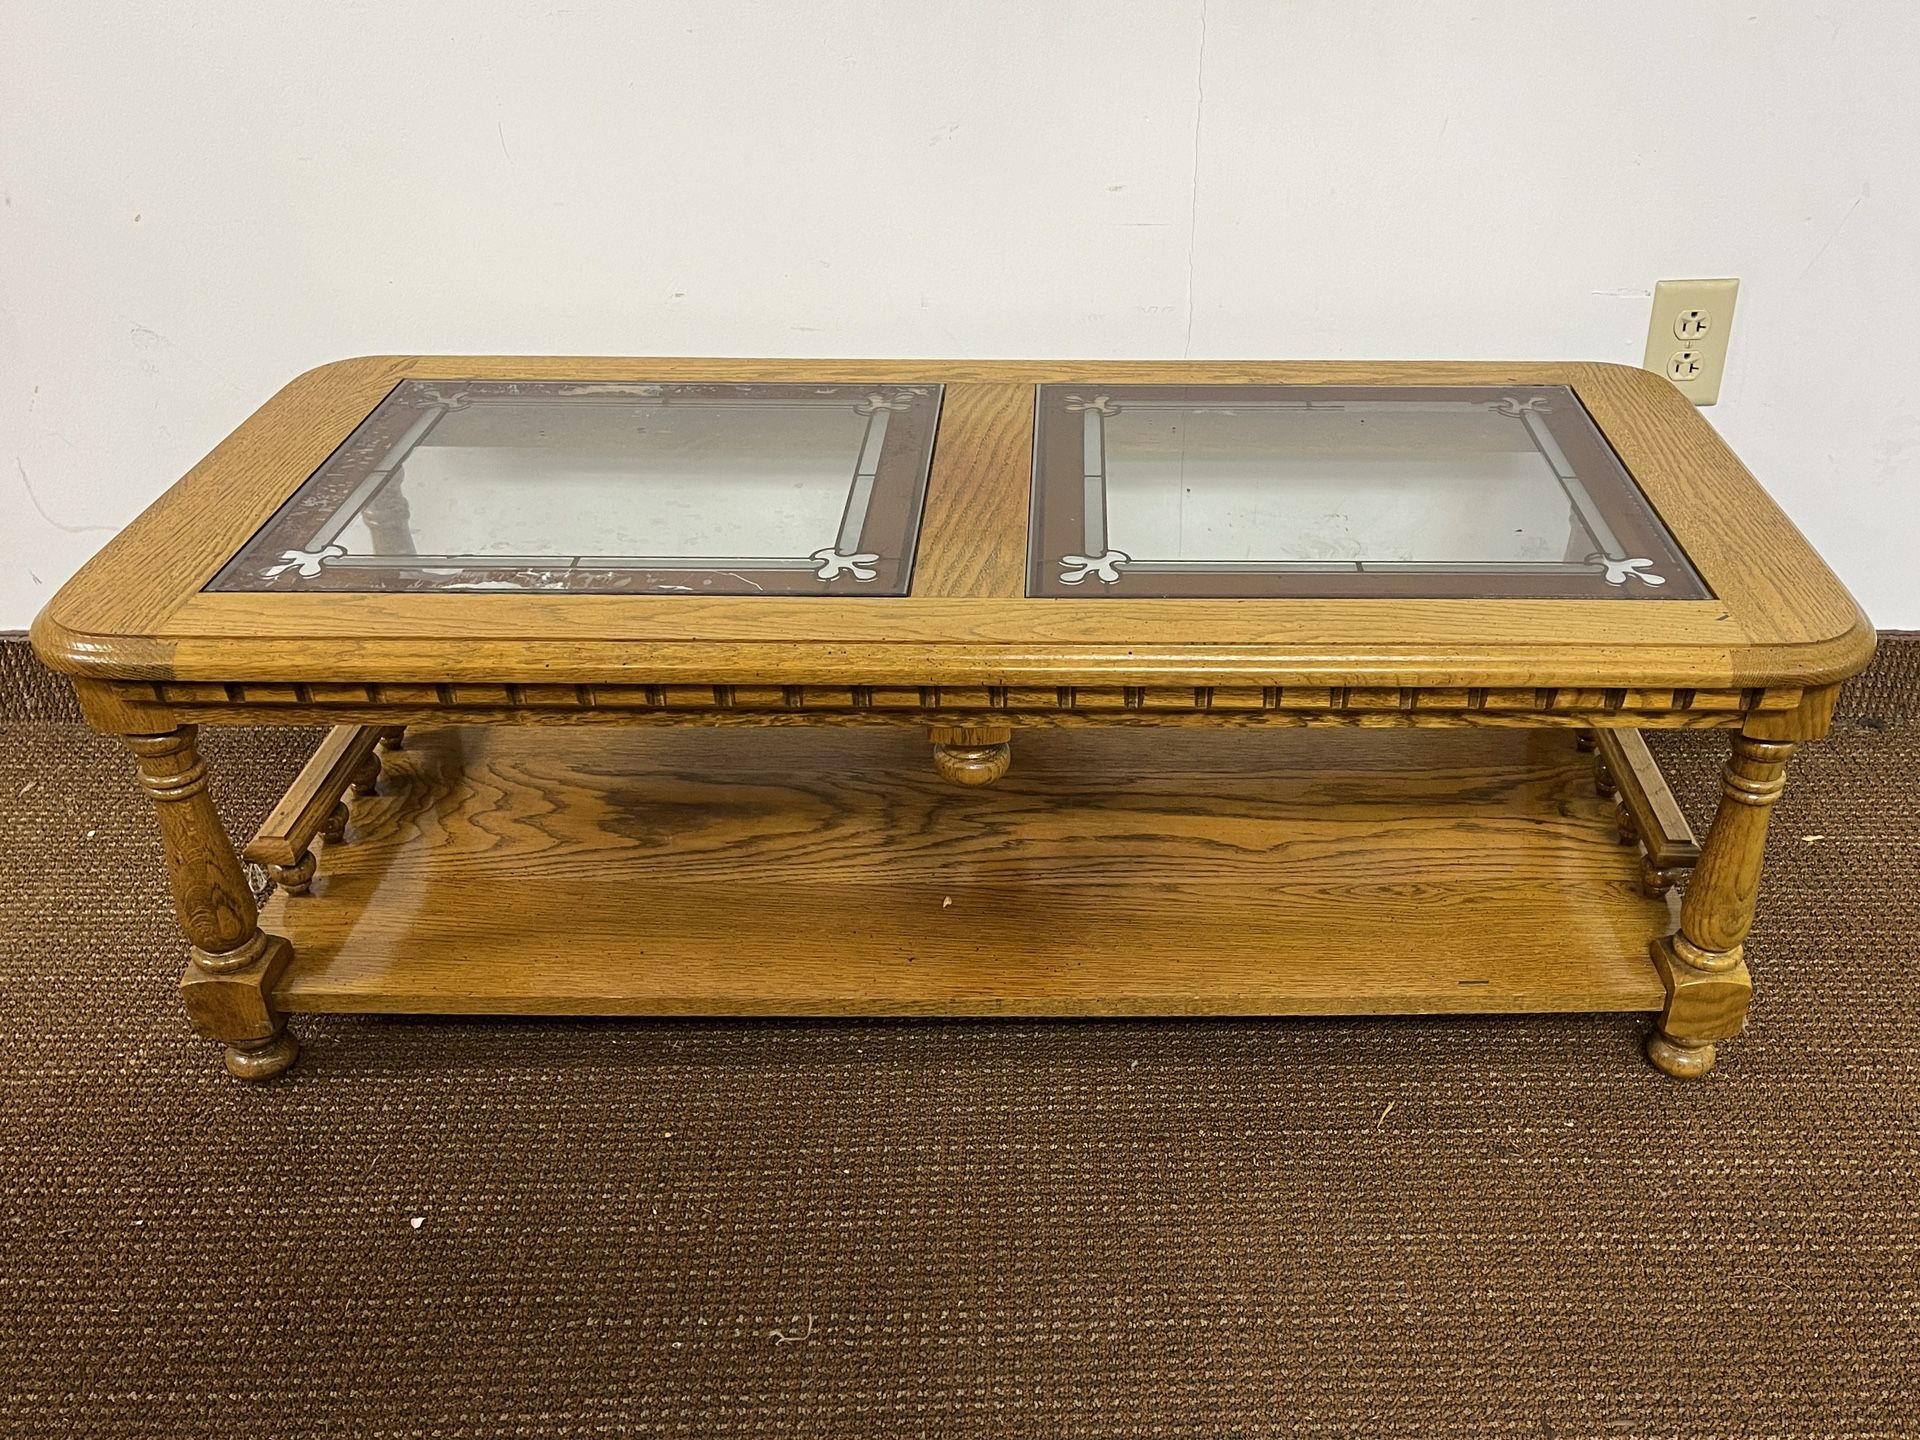 Vintage Coffee Table with Glass Inserts. See All Pics. Retro Center Table. Mid Century Coffee Table